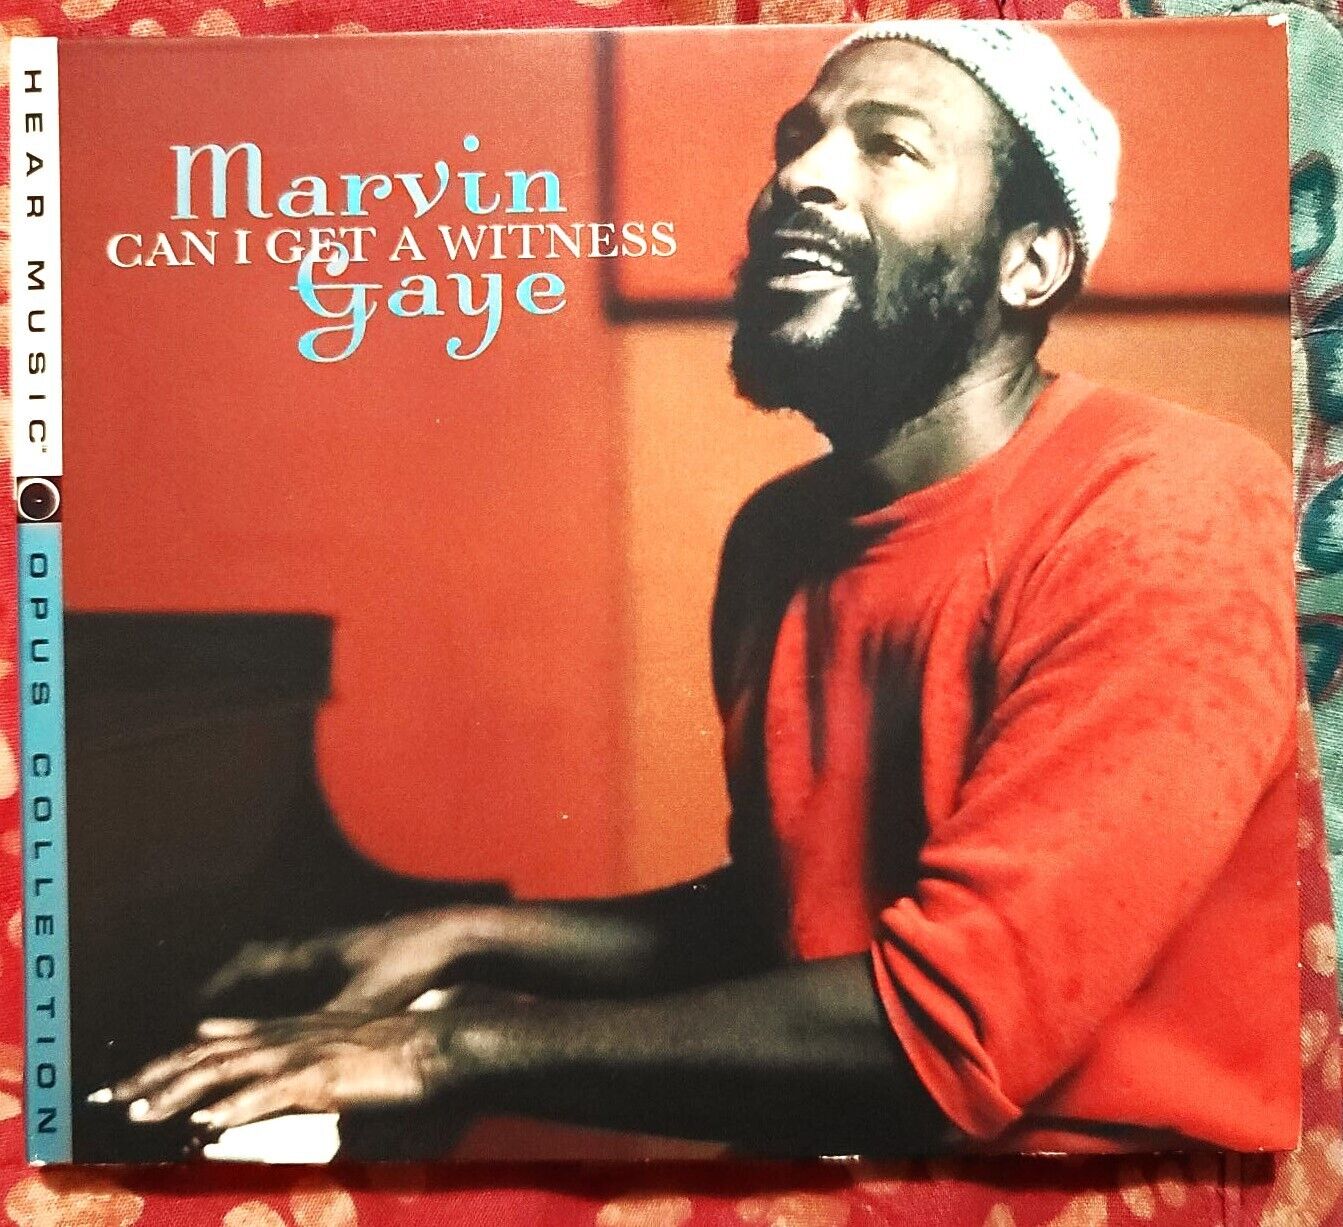 Can I Get a Witness by Marvin Gaye (CD, 2008) Like New